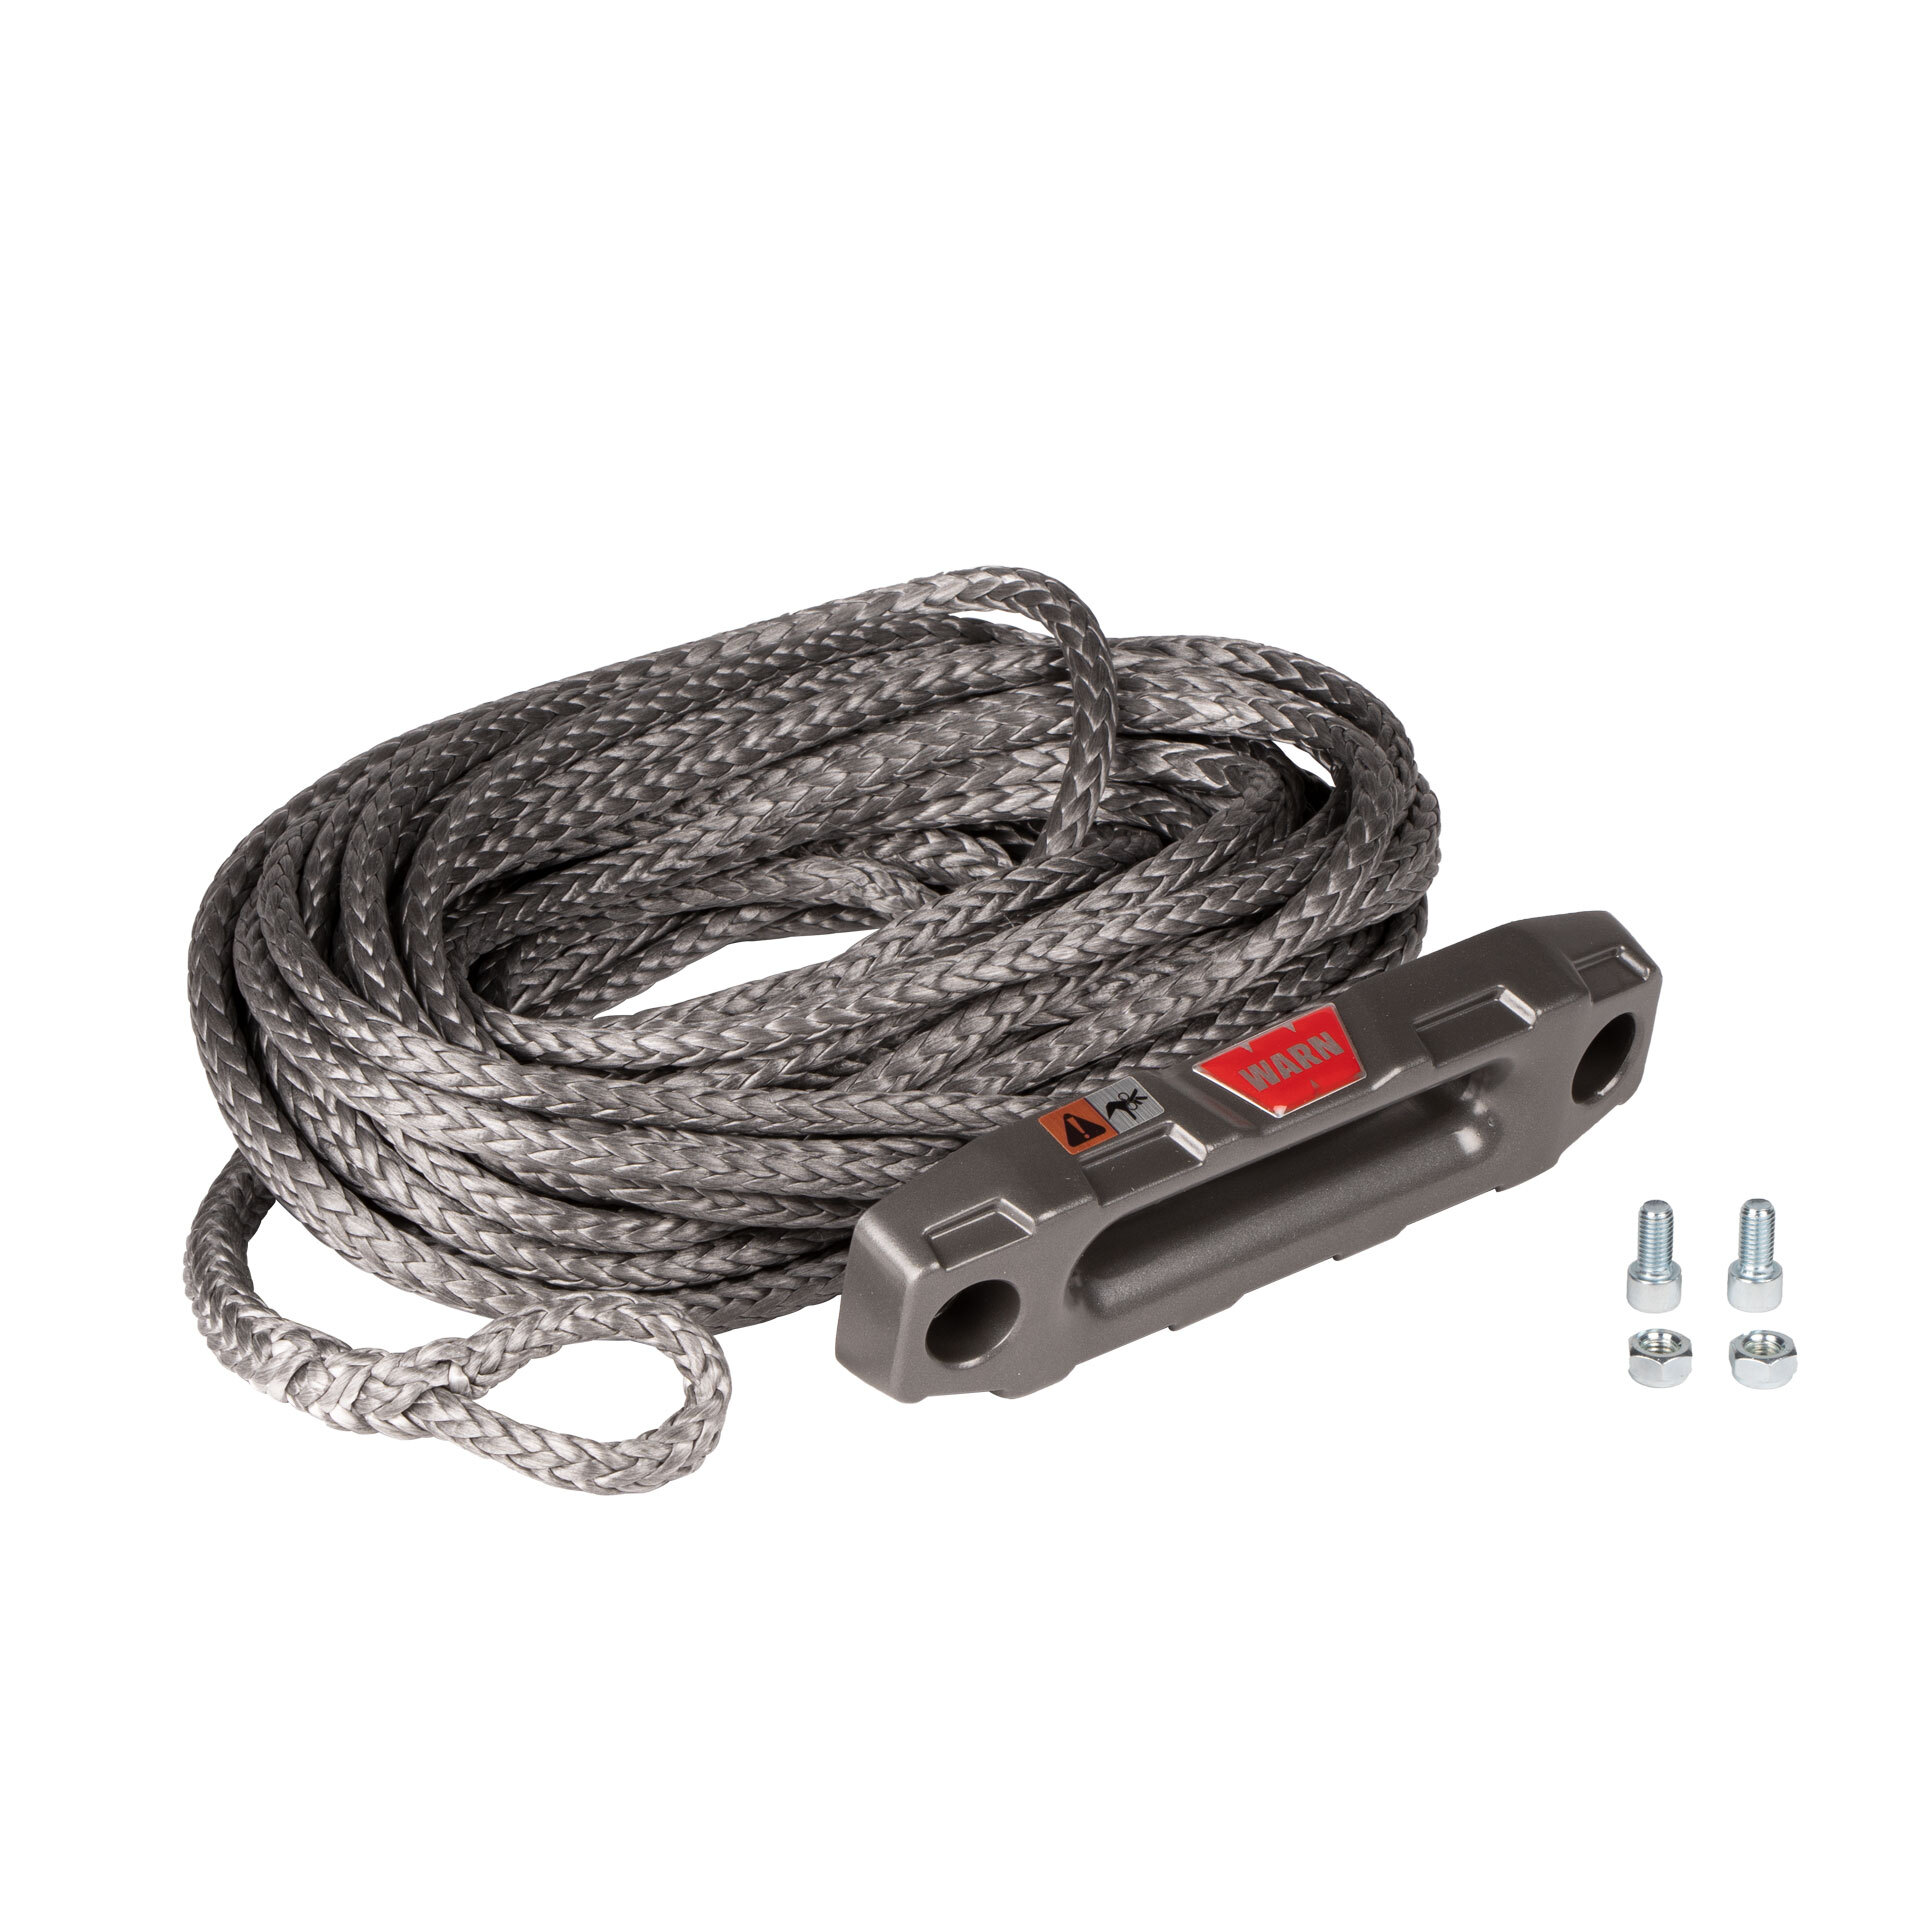 WARN® VRX 4500 Synthetic Rope Upgrade Kit